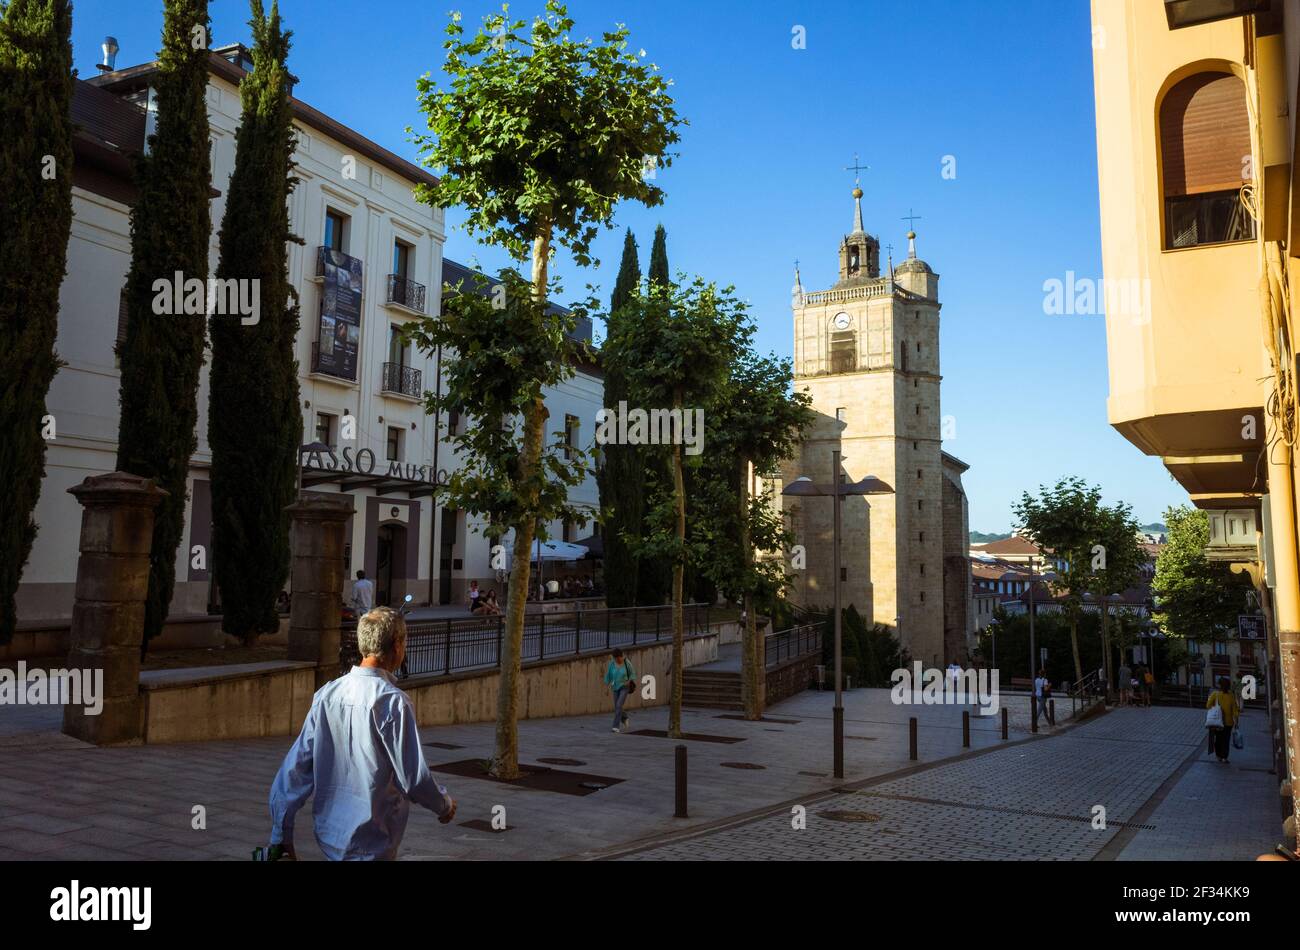 Irun, Gipuzkoa, Basque Country, Spain - July 10th, 2019 : A man walks past the Oiasso Roman Museum. Bell tower of Santa Maria del Juncal church in bac Stock Photo